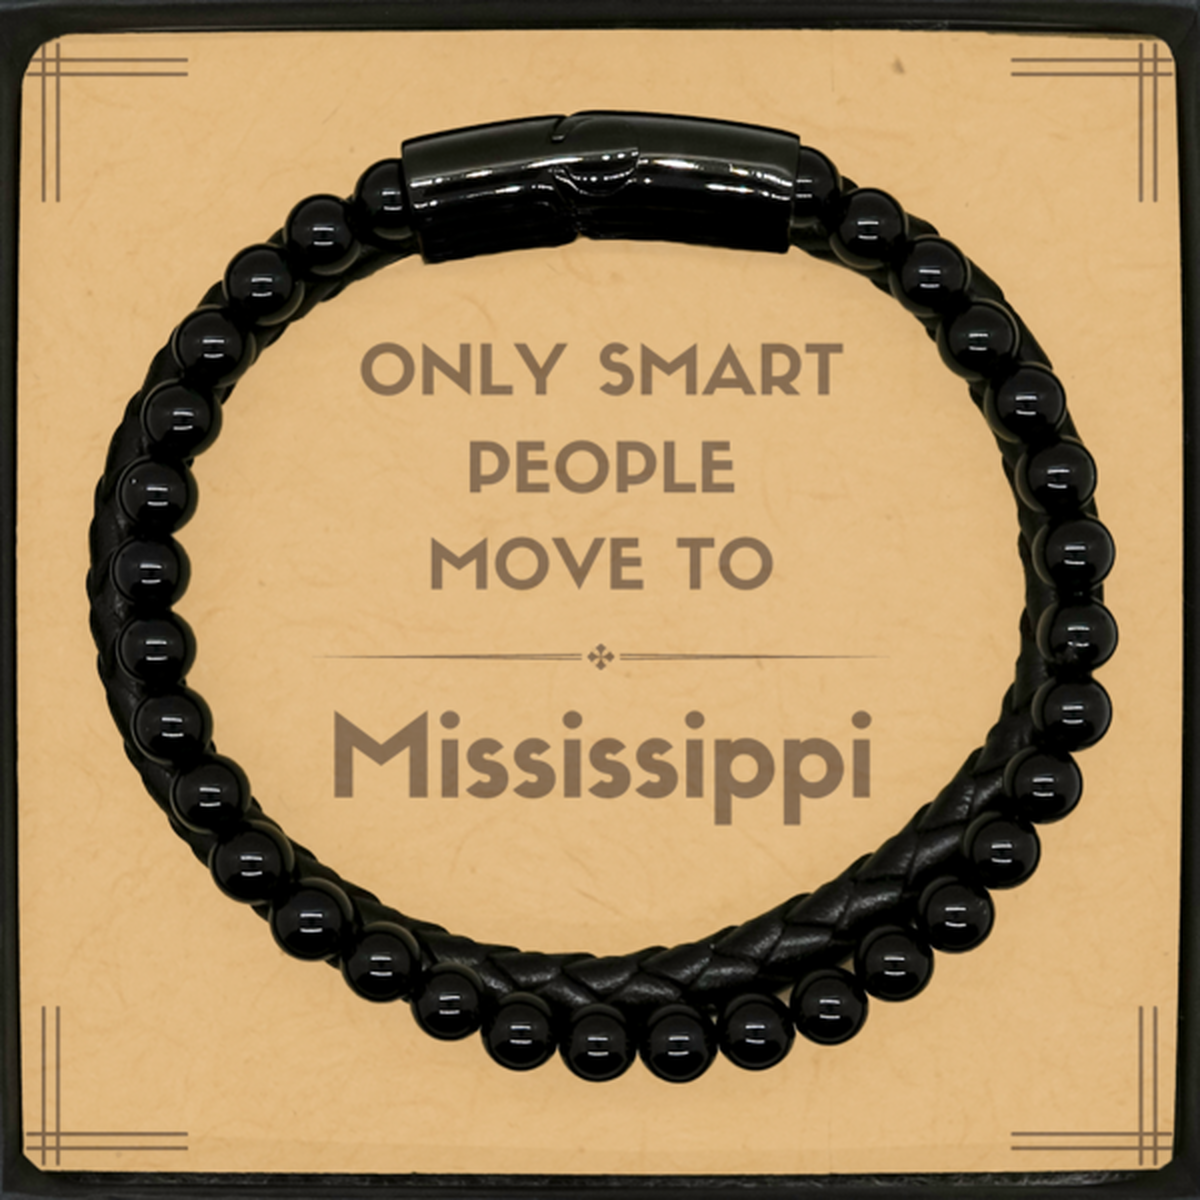 Only smart people move to Mississippi Stone Leather Bracelets, Message Card Gifts For Mississippi, Move to Mississippi Gifts for Friends Coworker Funny Saying Quote